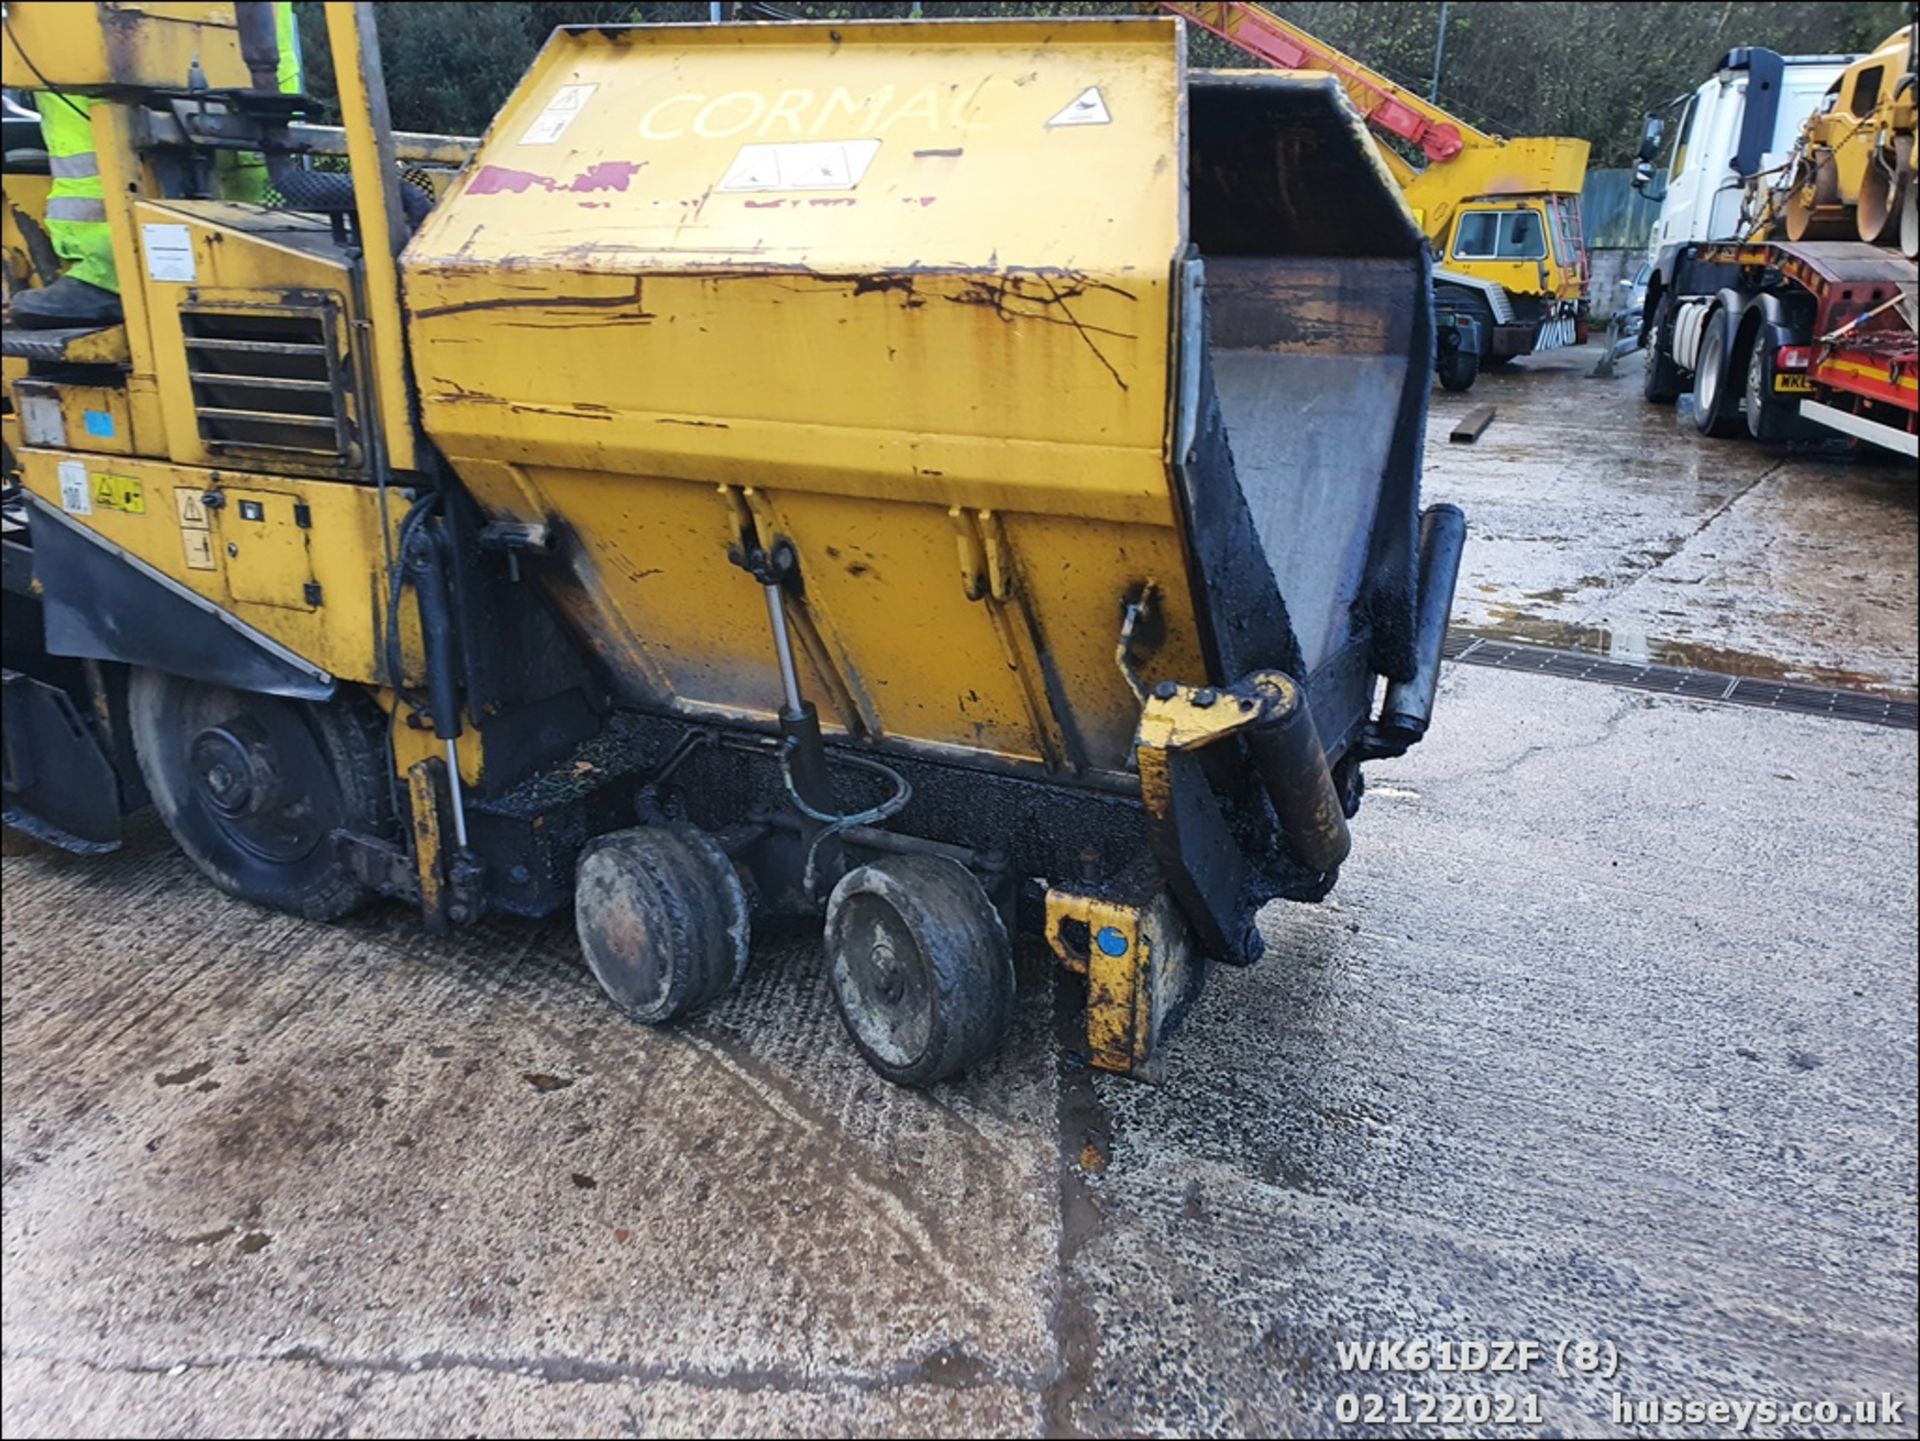 AMMANN PW2700 PAVER WK61DZF V5 & SERVICE PRINT OUT. 5842HRS - Image 8 of 28